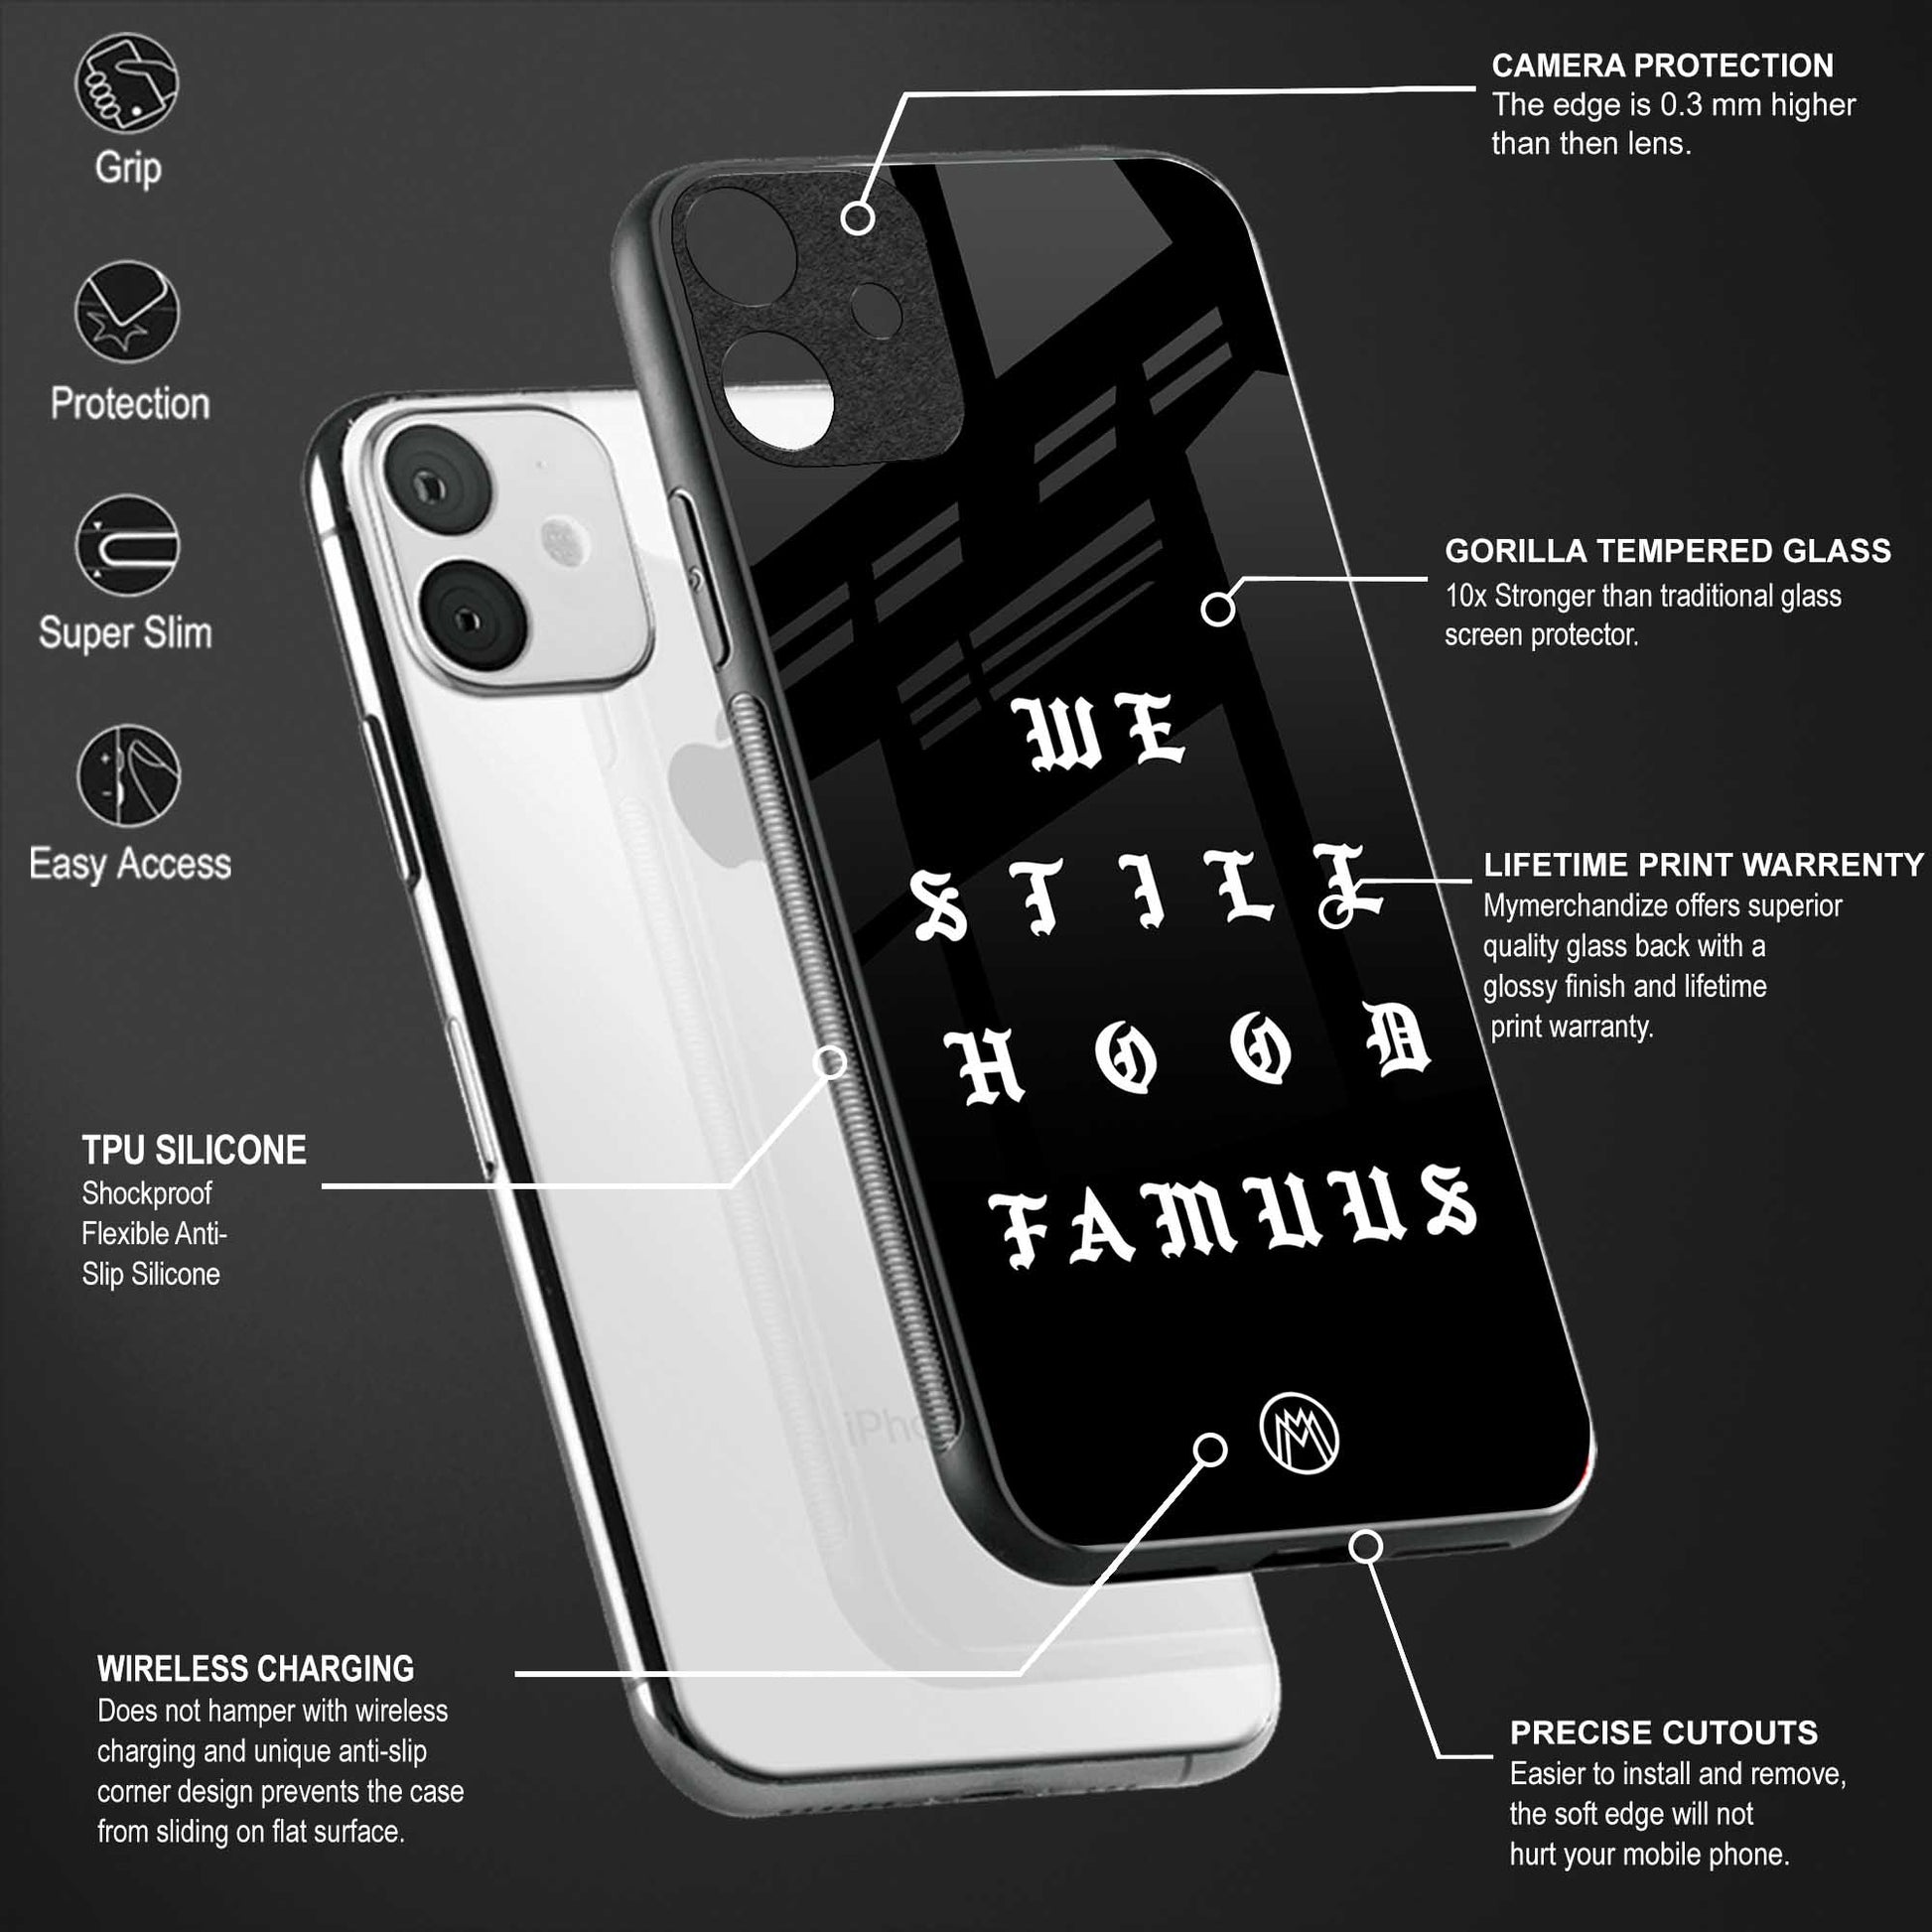 hood famous phone cover for oneplus 6t